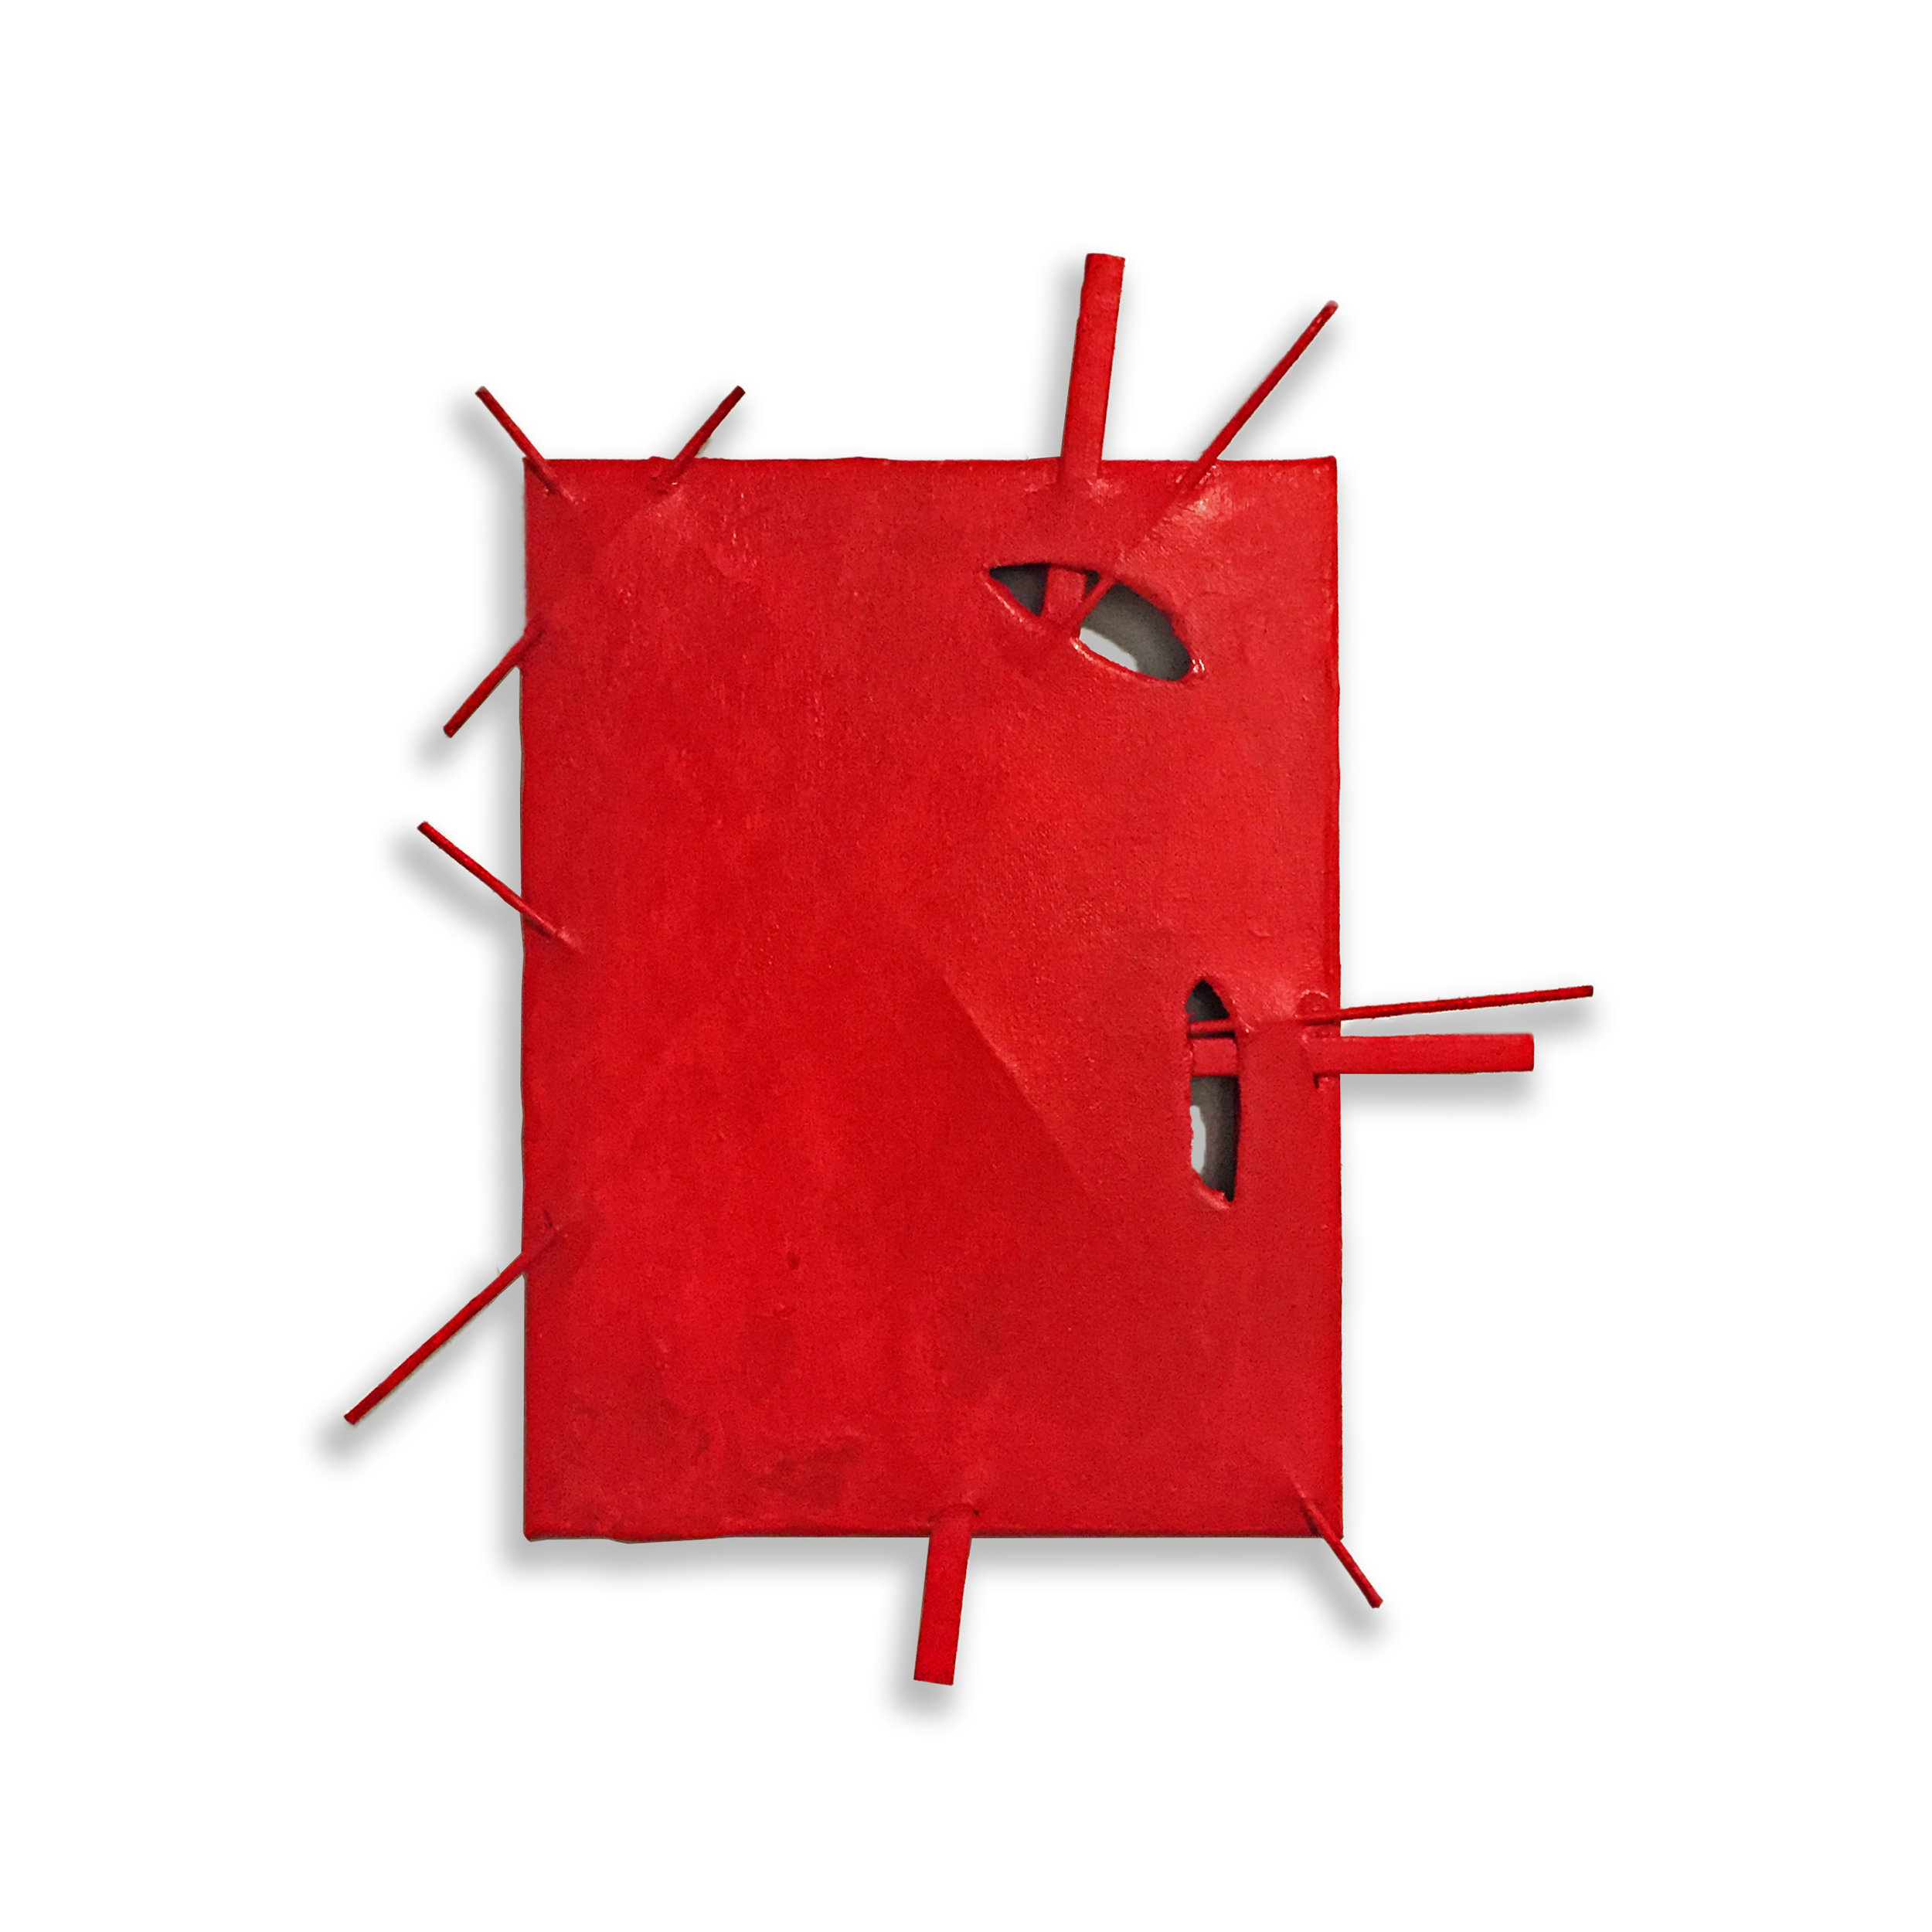 Suprematist Construction (Red), 2018, acrylic, canvas and wood, 16” x 14”